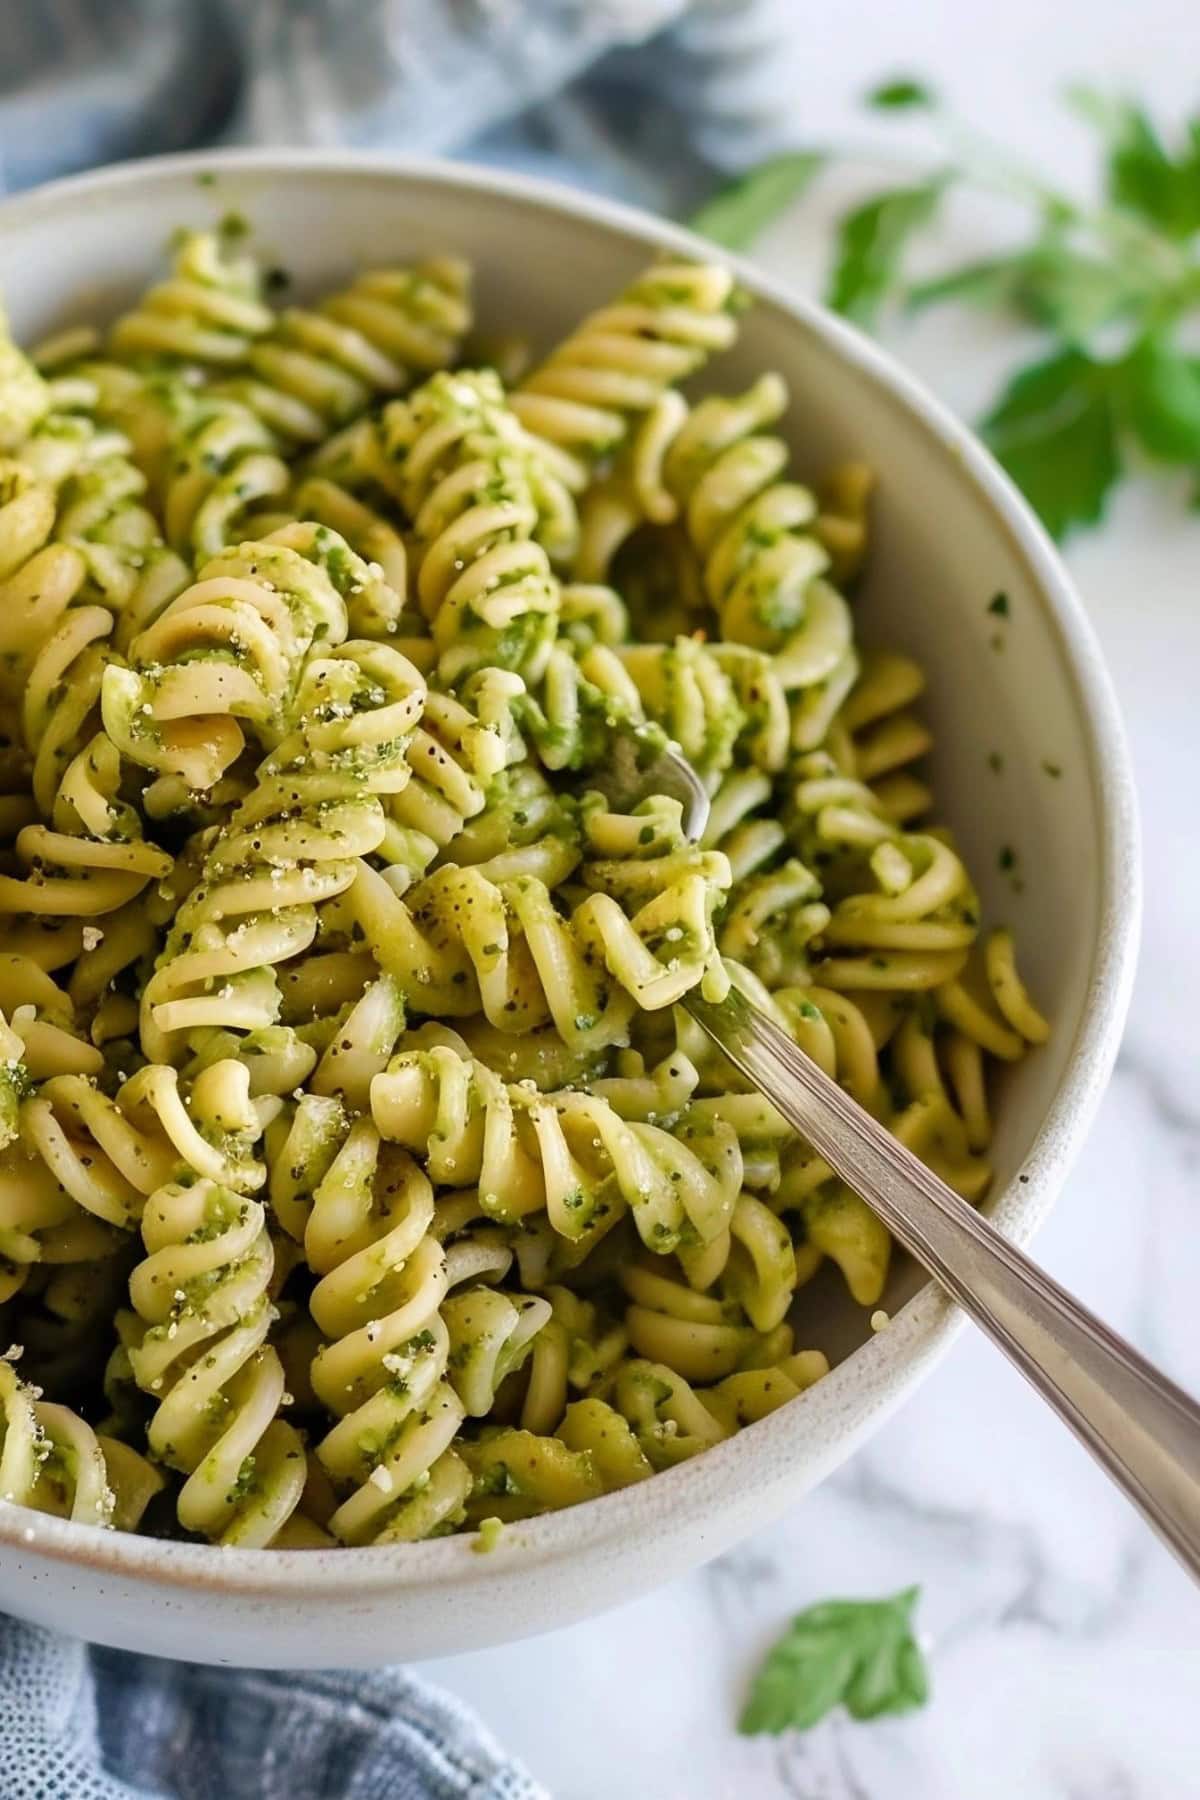 Super Close Up of Green Pesto Pasta in a Bowl with a Fork